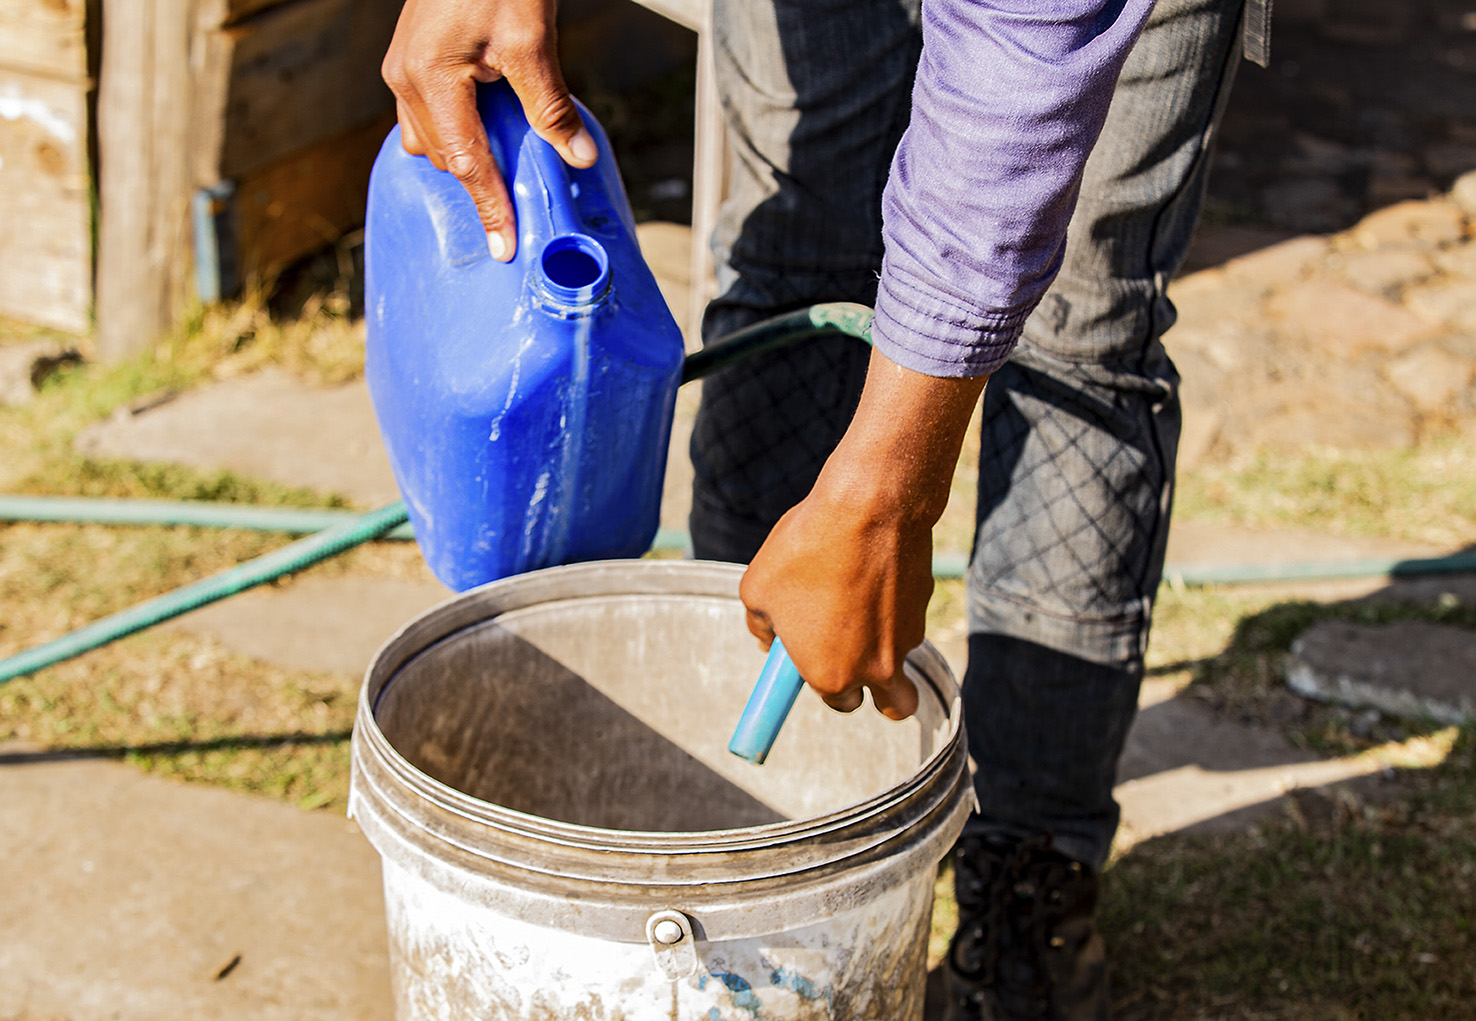 Makhanda residents without water again as treatment works fail - Daily Maverick